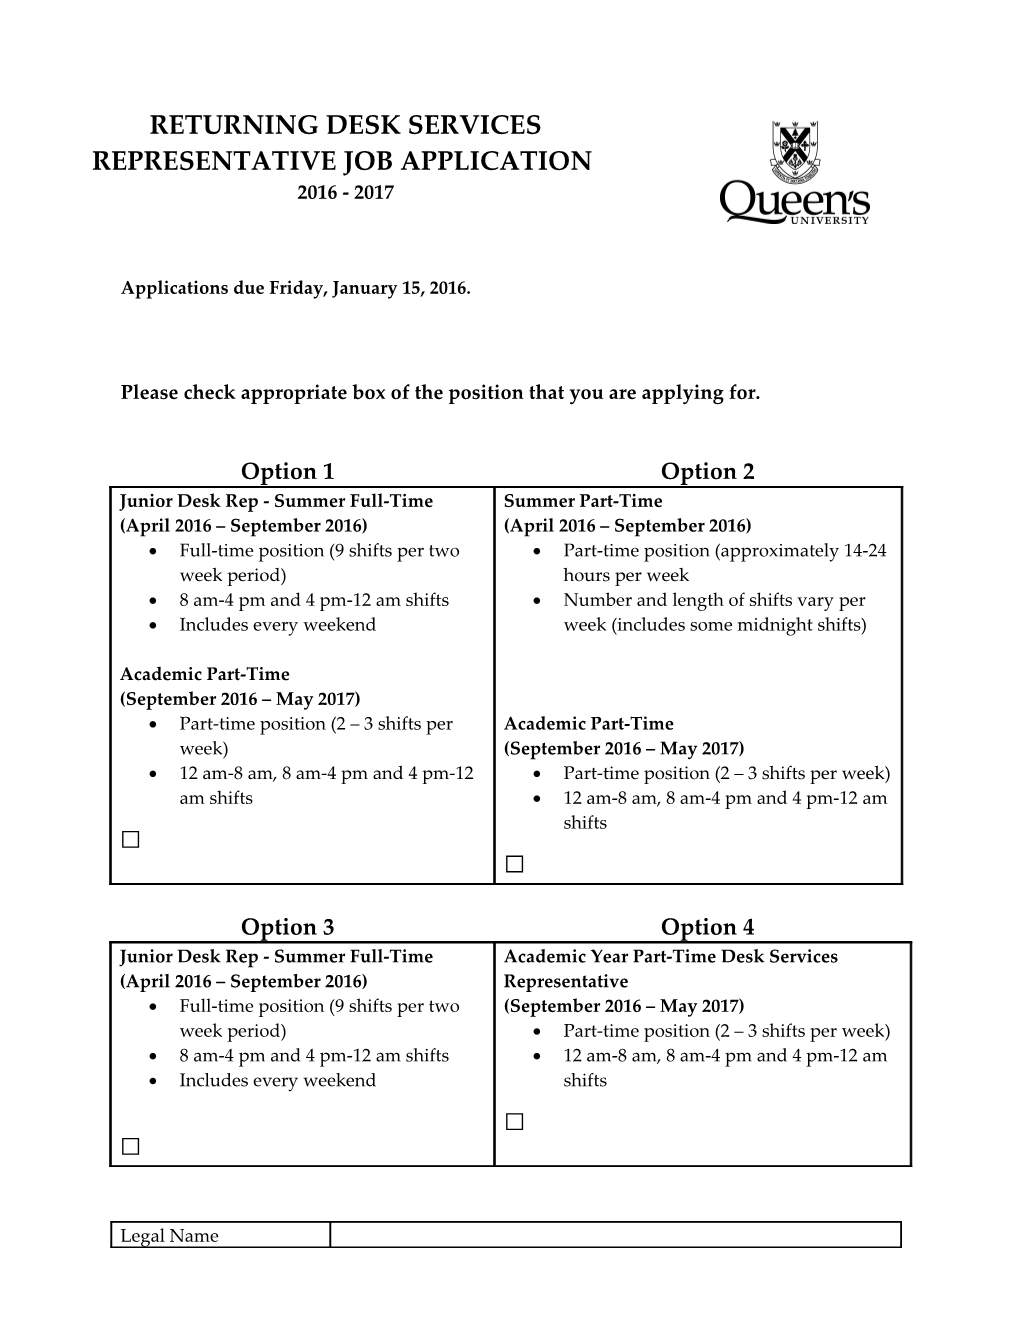 Please Check Appropriate Box of the Position That You Are Applying For